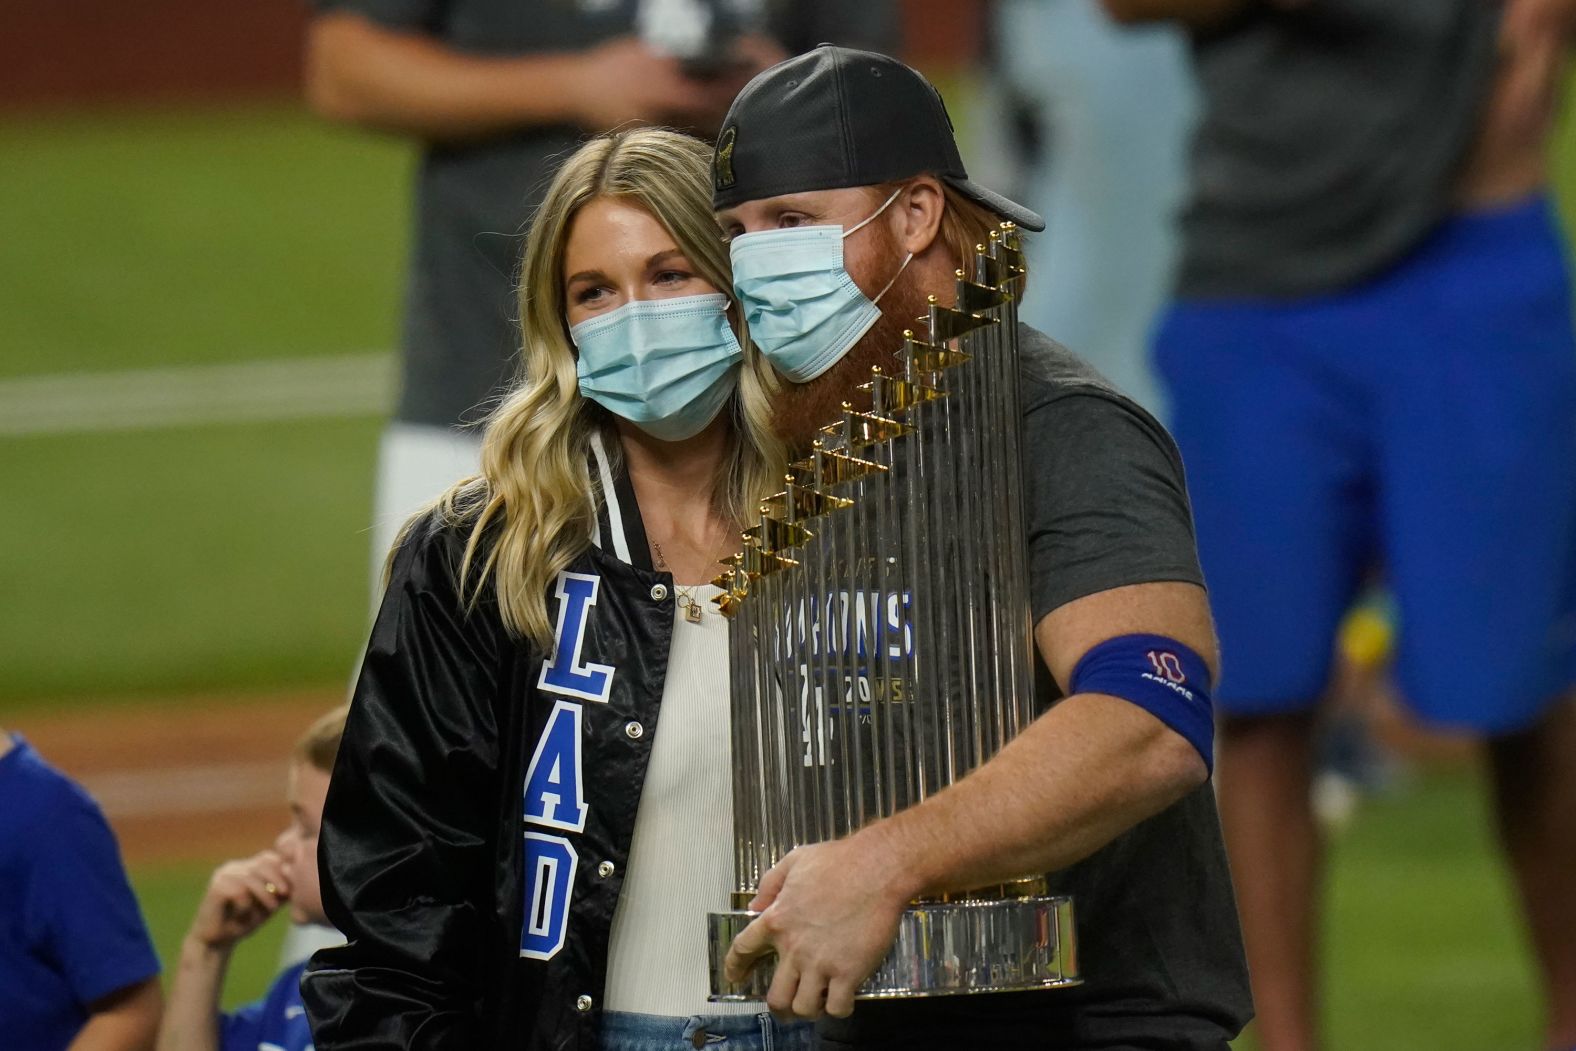 Dodgers third baseman Justin Turner celebrates with the trophy. He had to be pulled in the middle of Game 6 <a href="https://www.cnn.com/2020/10/28/sport/justin-turner-coronavirus-los-angeles-dodgers-world-series-spt-intl/index.html" target="_blank">after testing positive for Covid-19.</a> He returned to the field for the postgame celebrations.